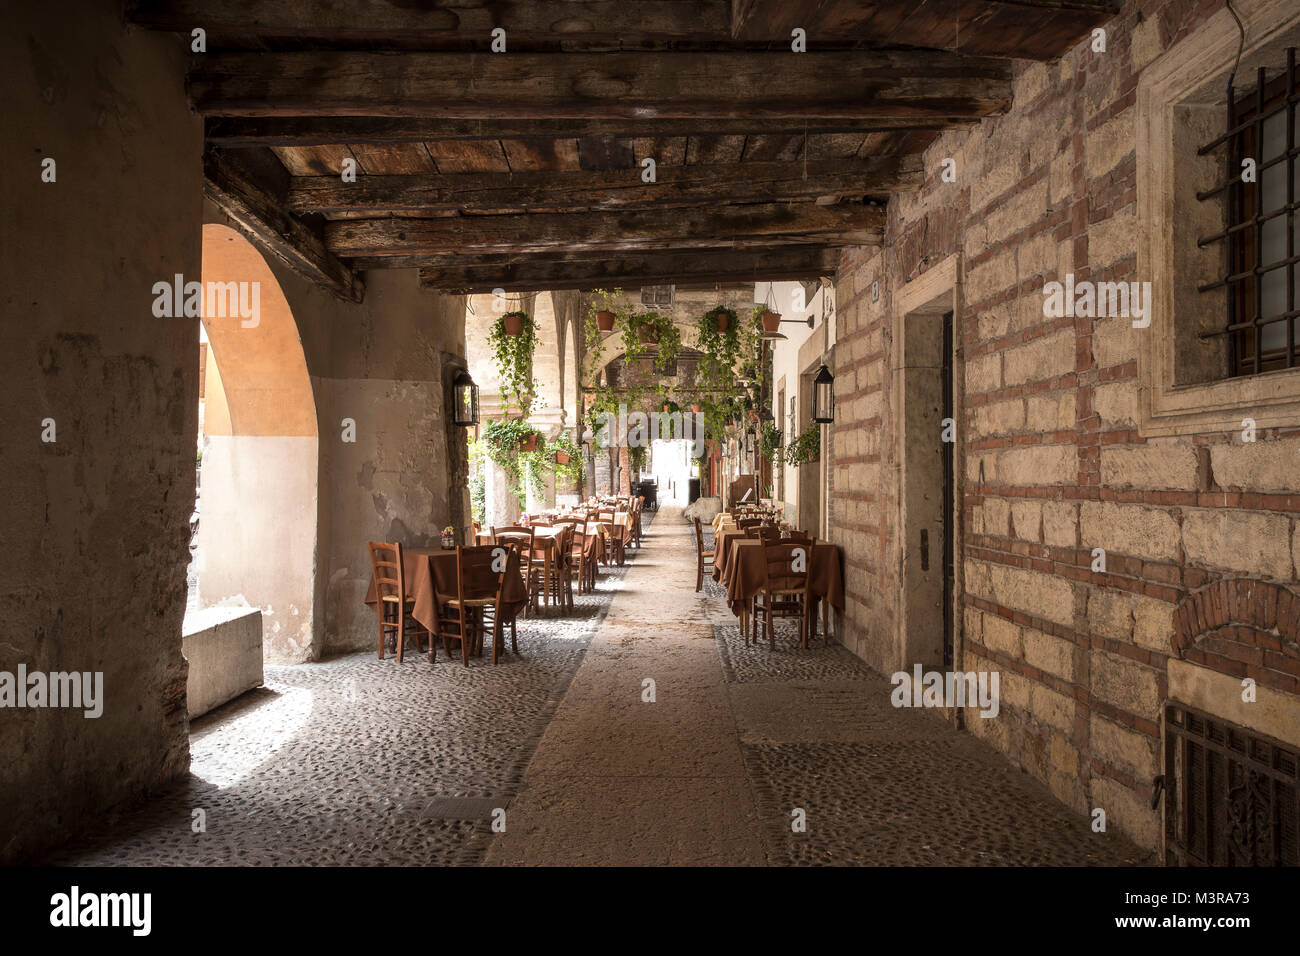 Restaurant in old town of Verona, Italy Stock Photo